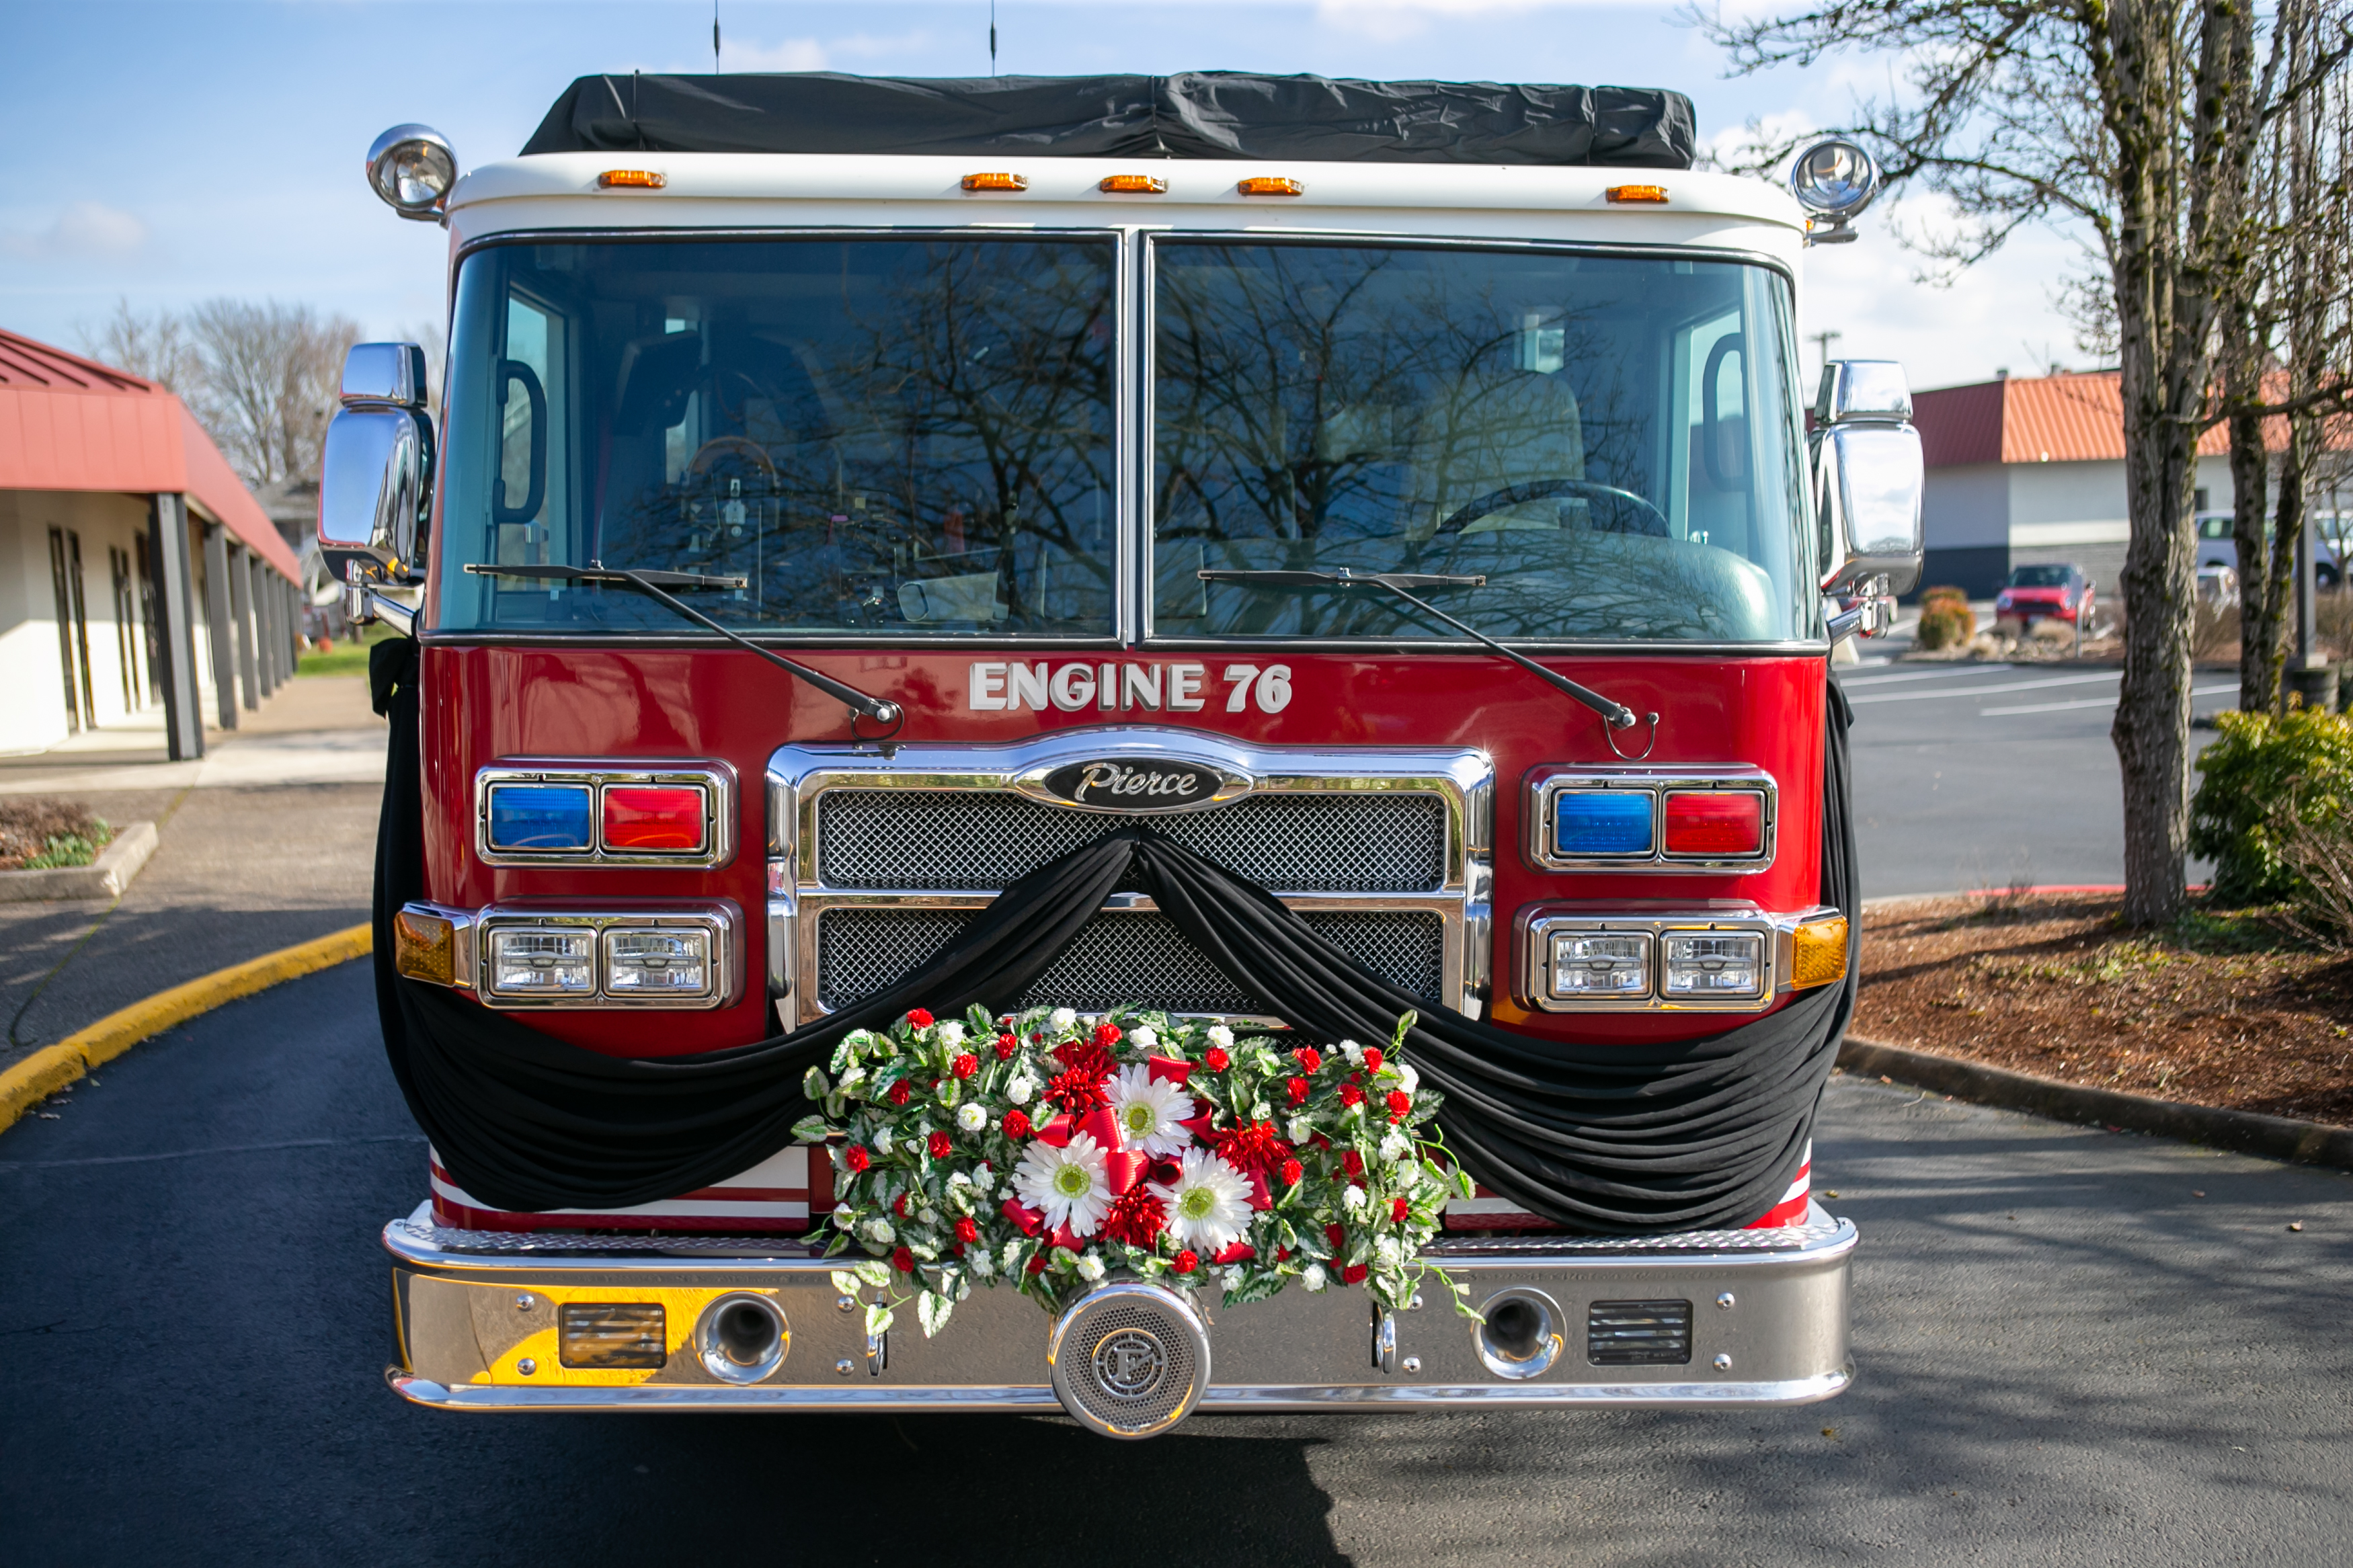 Fire engine No. 76 is adorned with flowers in honor of Gresham Firefighter Brandon Norbury in downtown Gresham, Oregon on Wednesday, Feb. 15 2023.